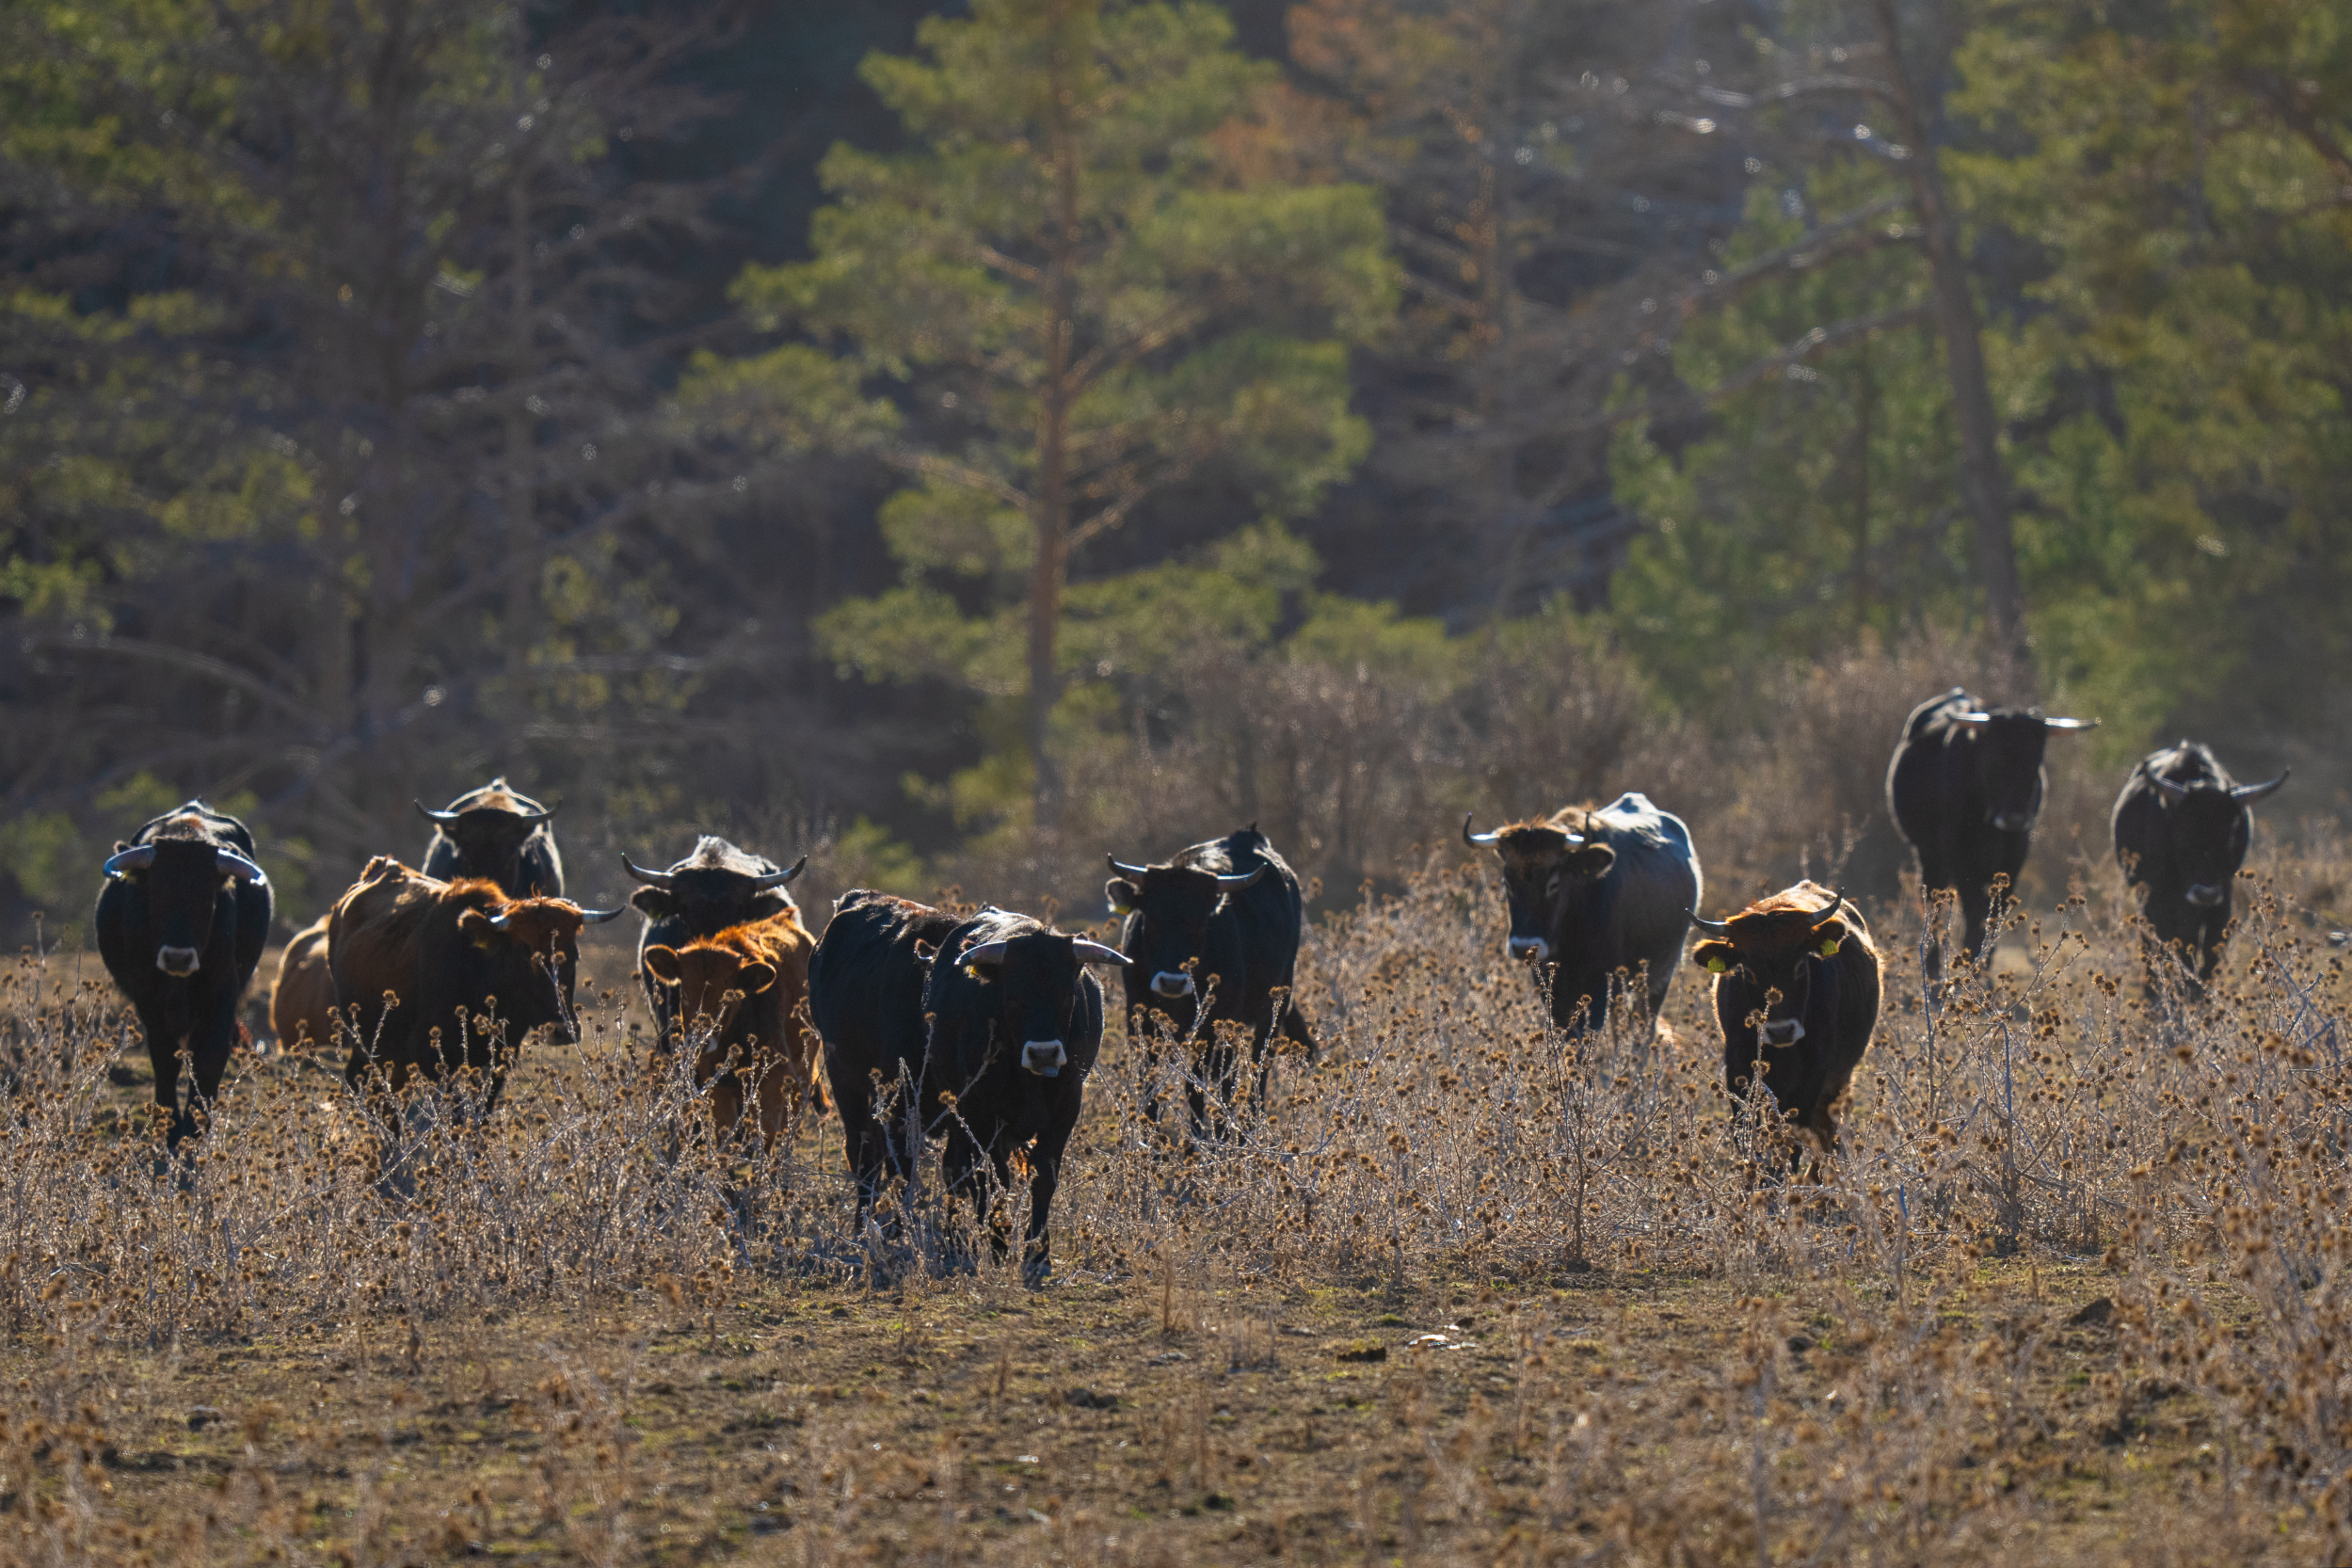 A Tauros herd in the Iberian Highlands rewilding landscape, central-eastern Spain.